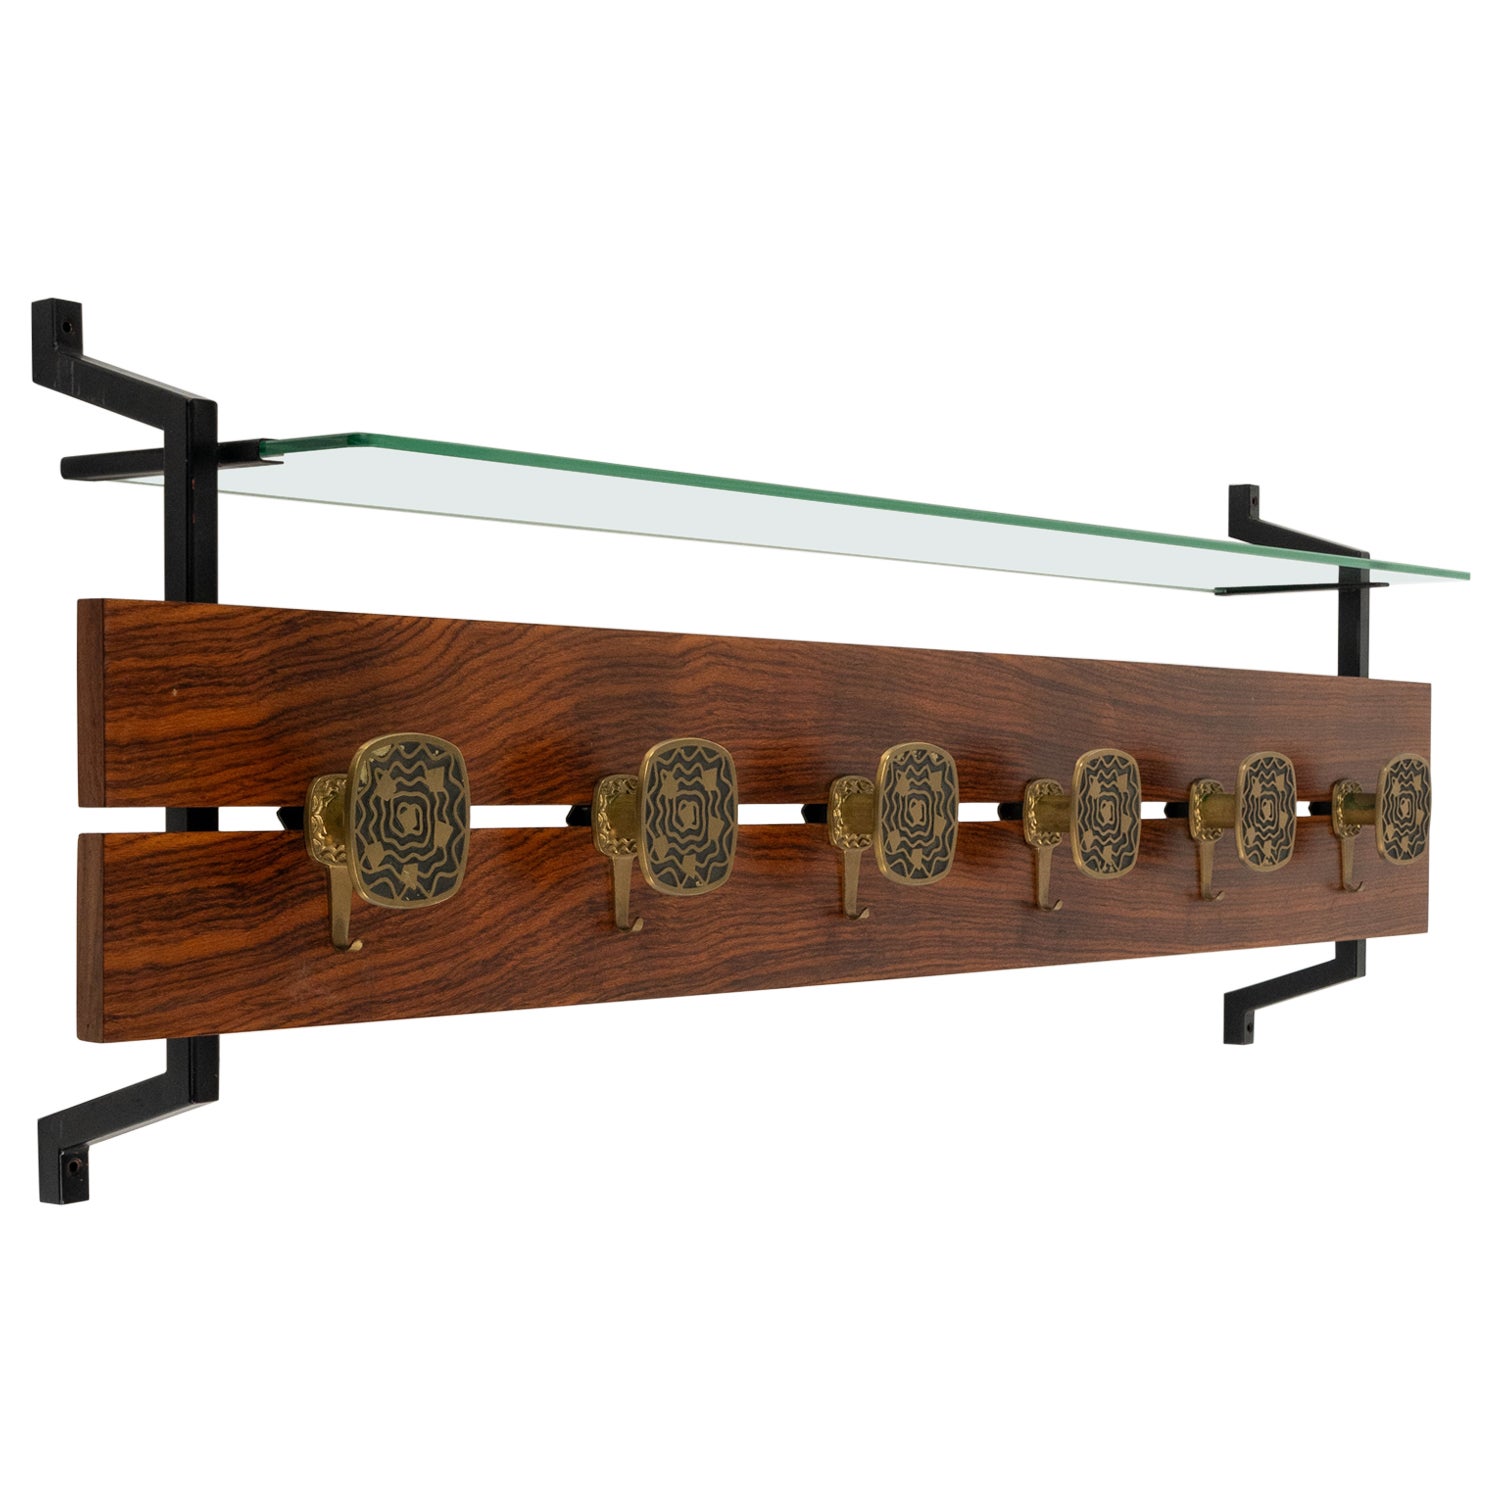 Midcentury Wood, Glass and Brass Coat Rack Herta Baller Style, Italy 1970s For Sale